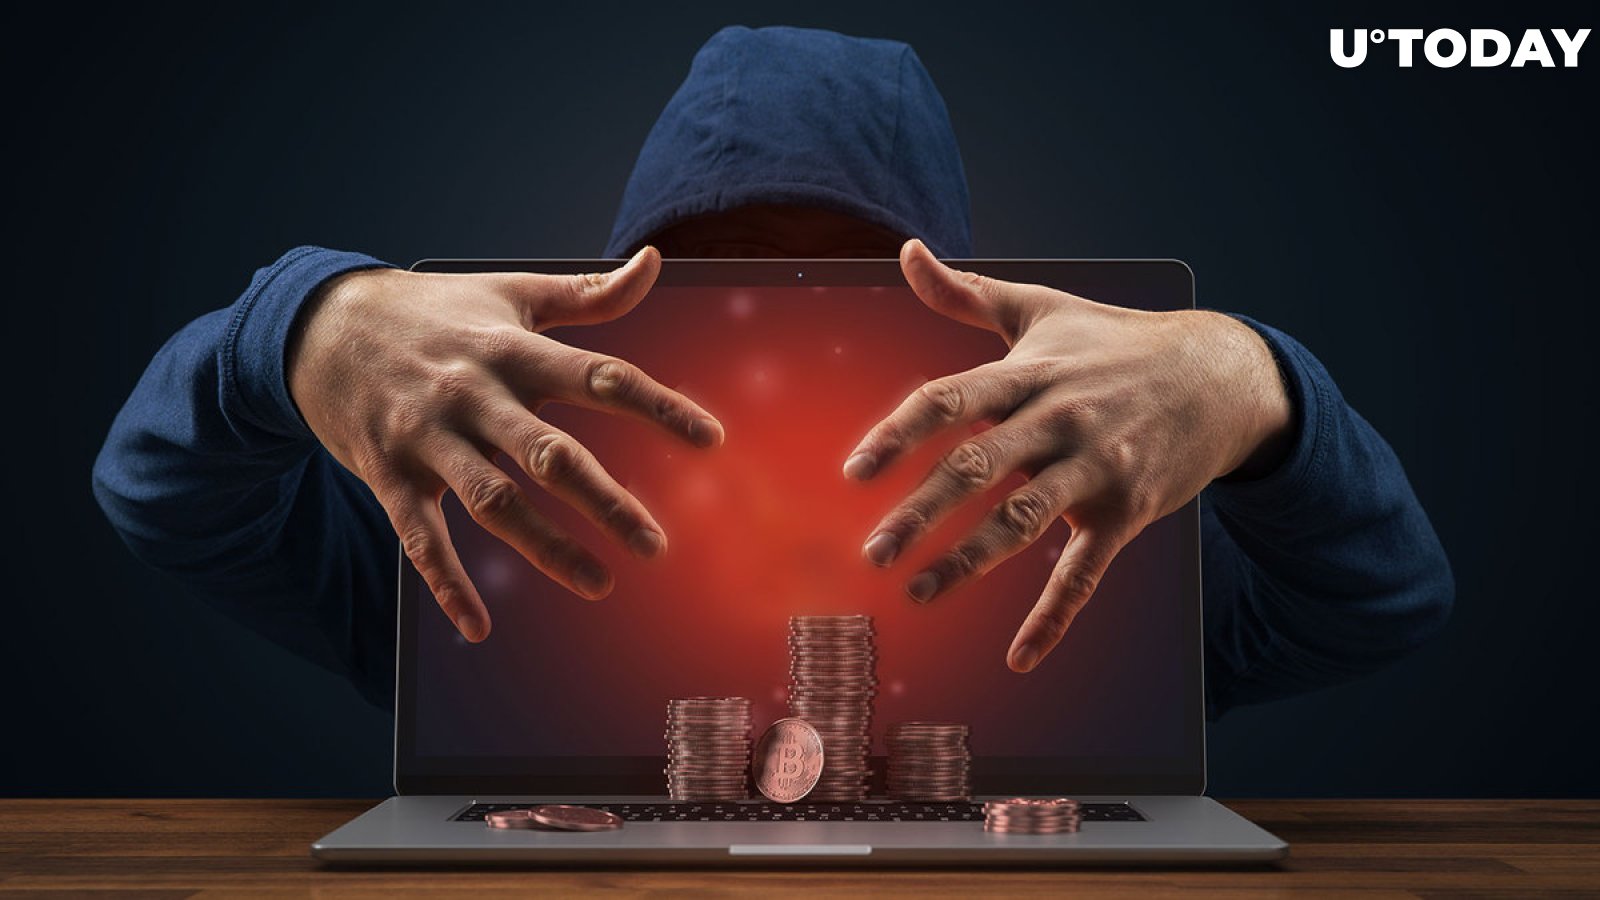 Scam Alert: New Method of Stealing Coins Emerges